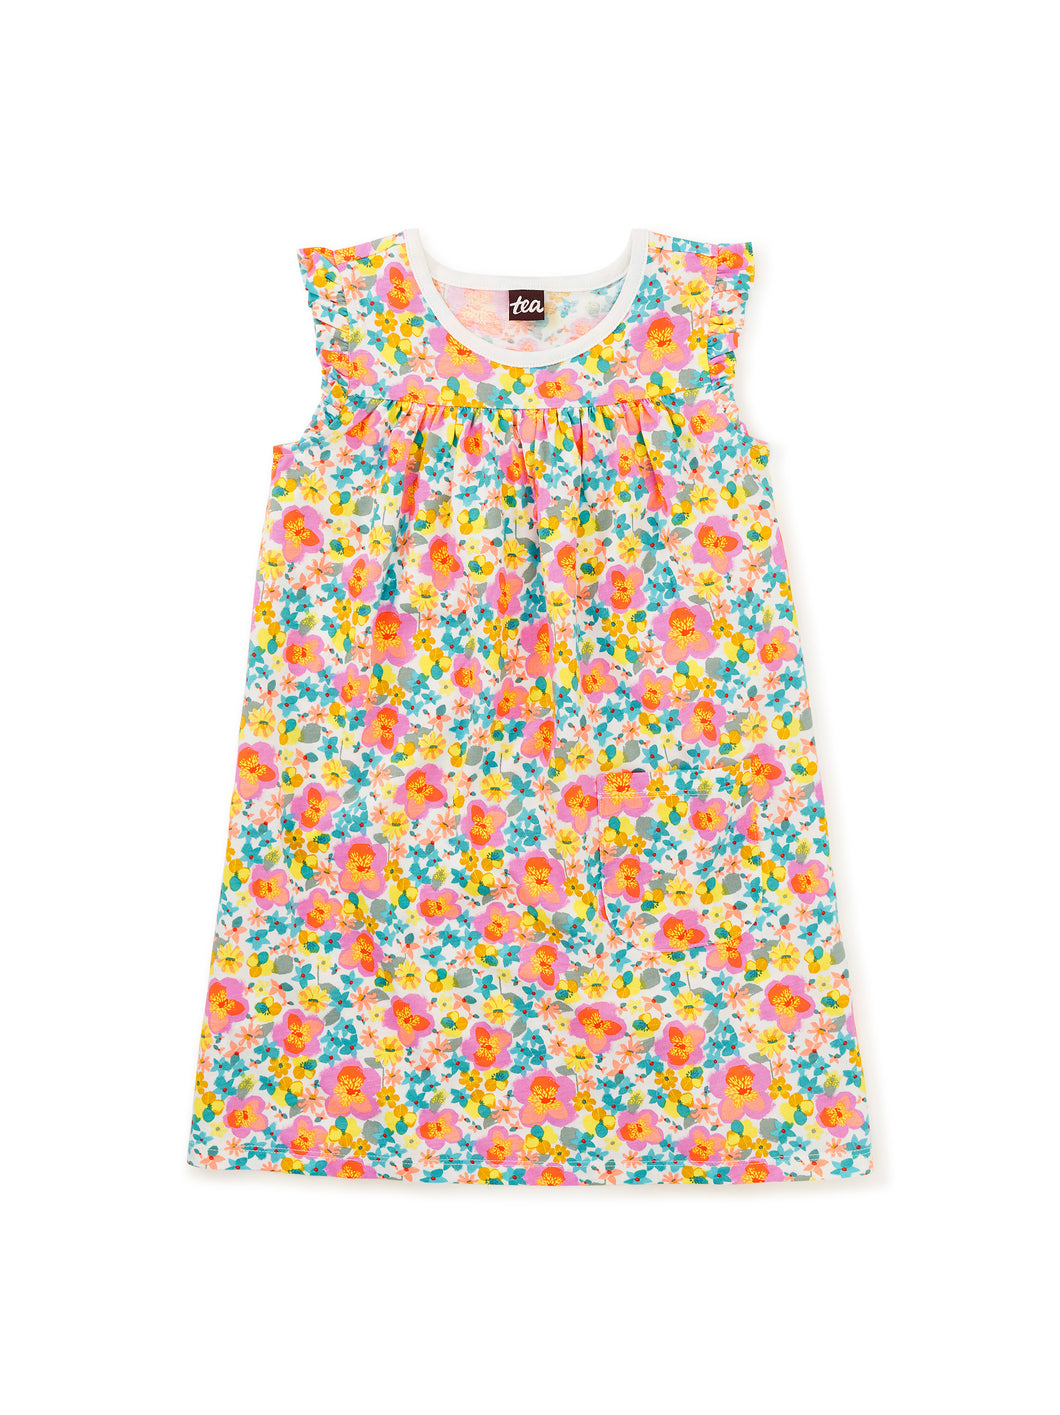 Mighty Mini Dress Tropical Hibiscus Floral